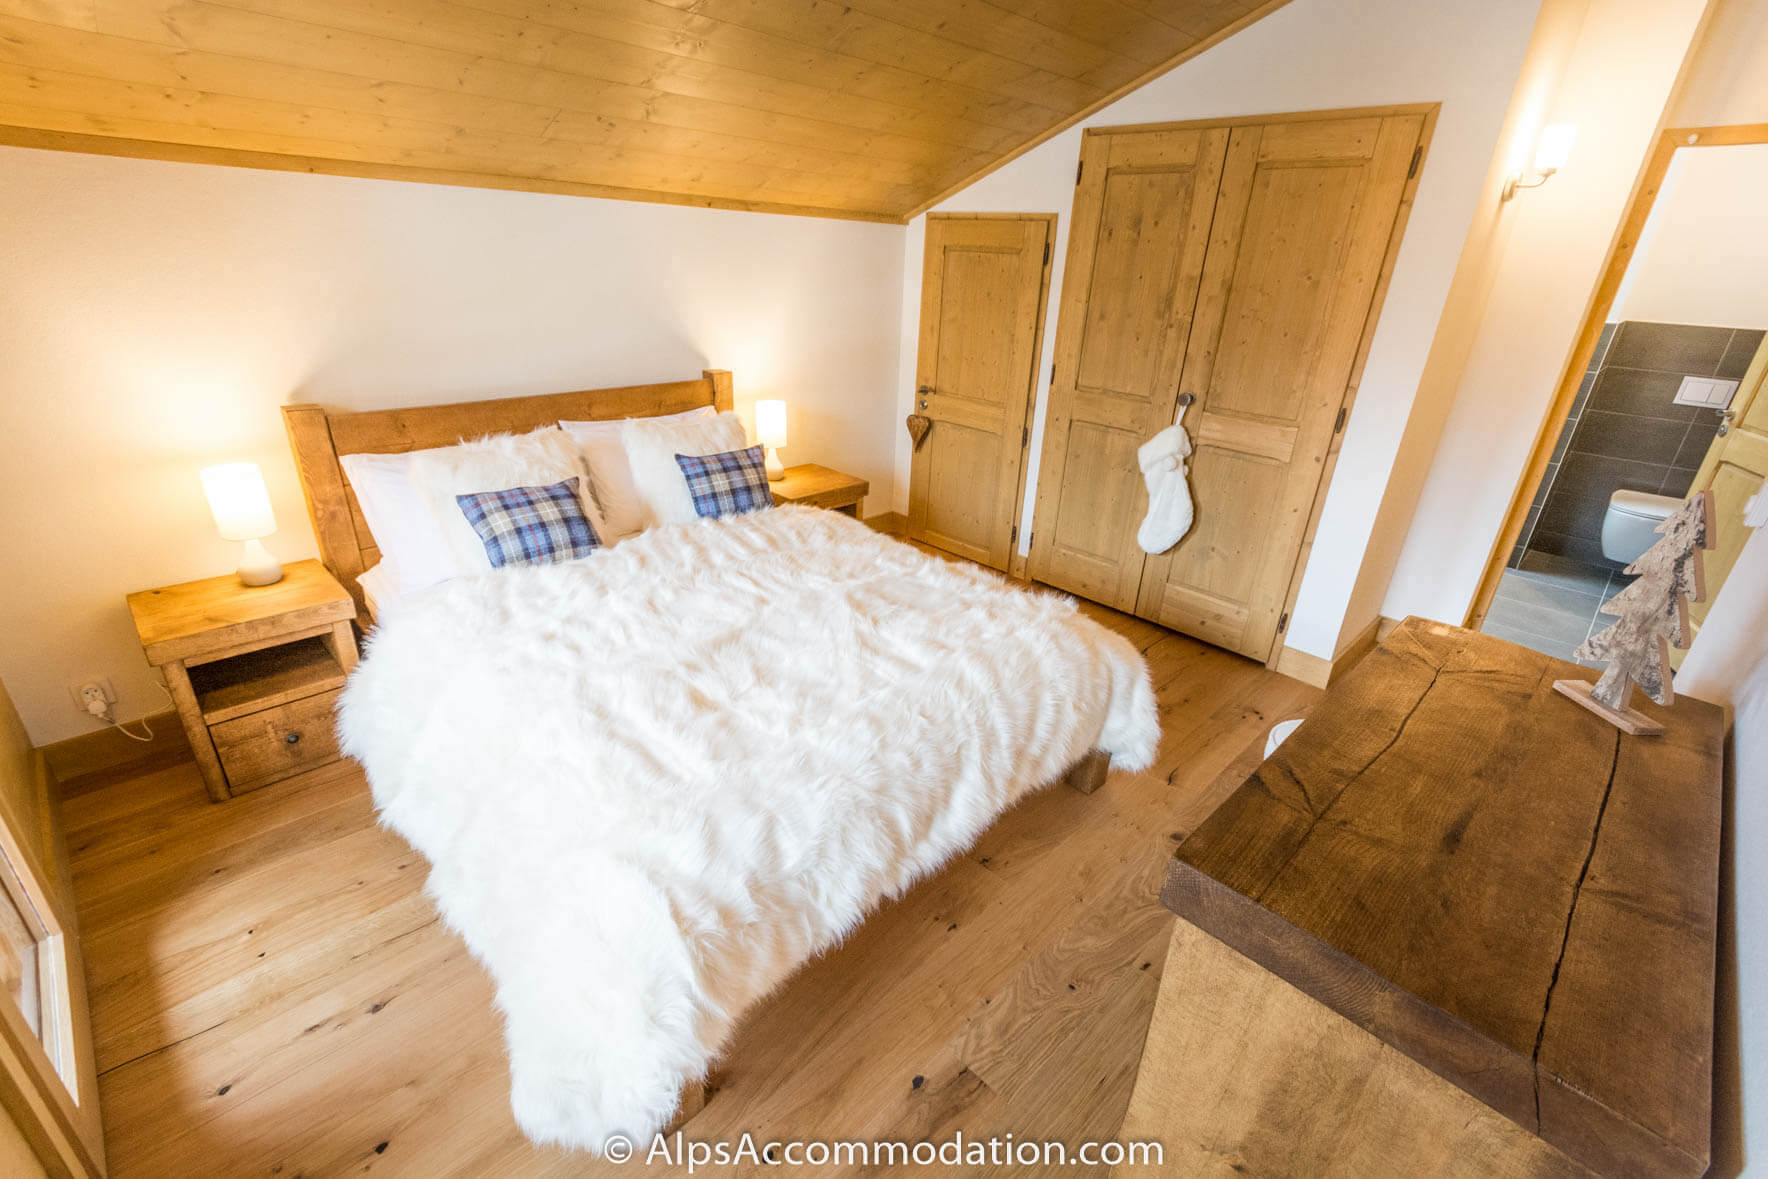 Chalet Louisa Samoëns - The ensuite king or twin bedroom with balcony